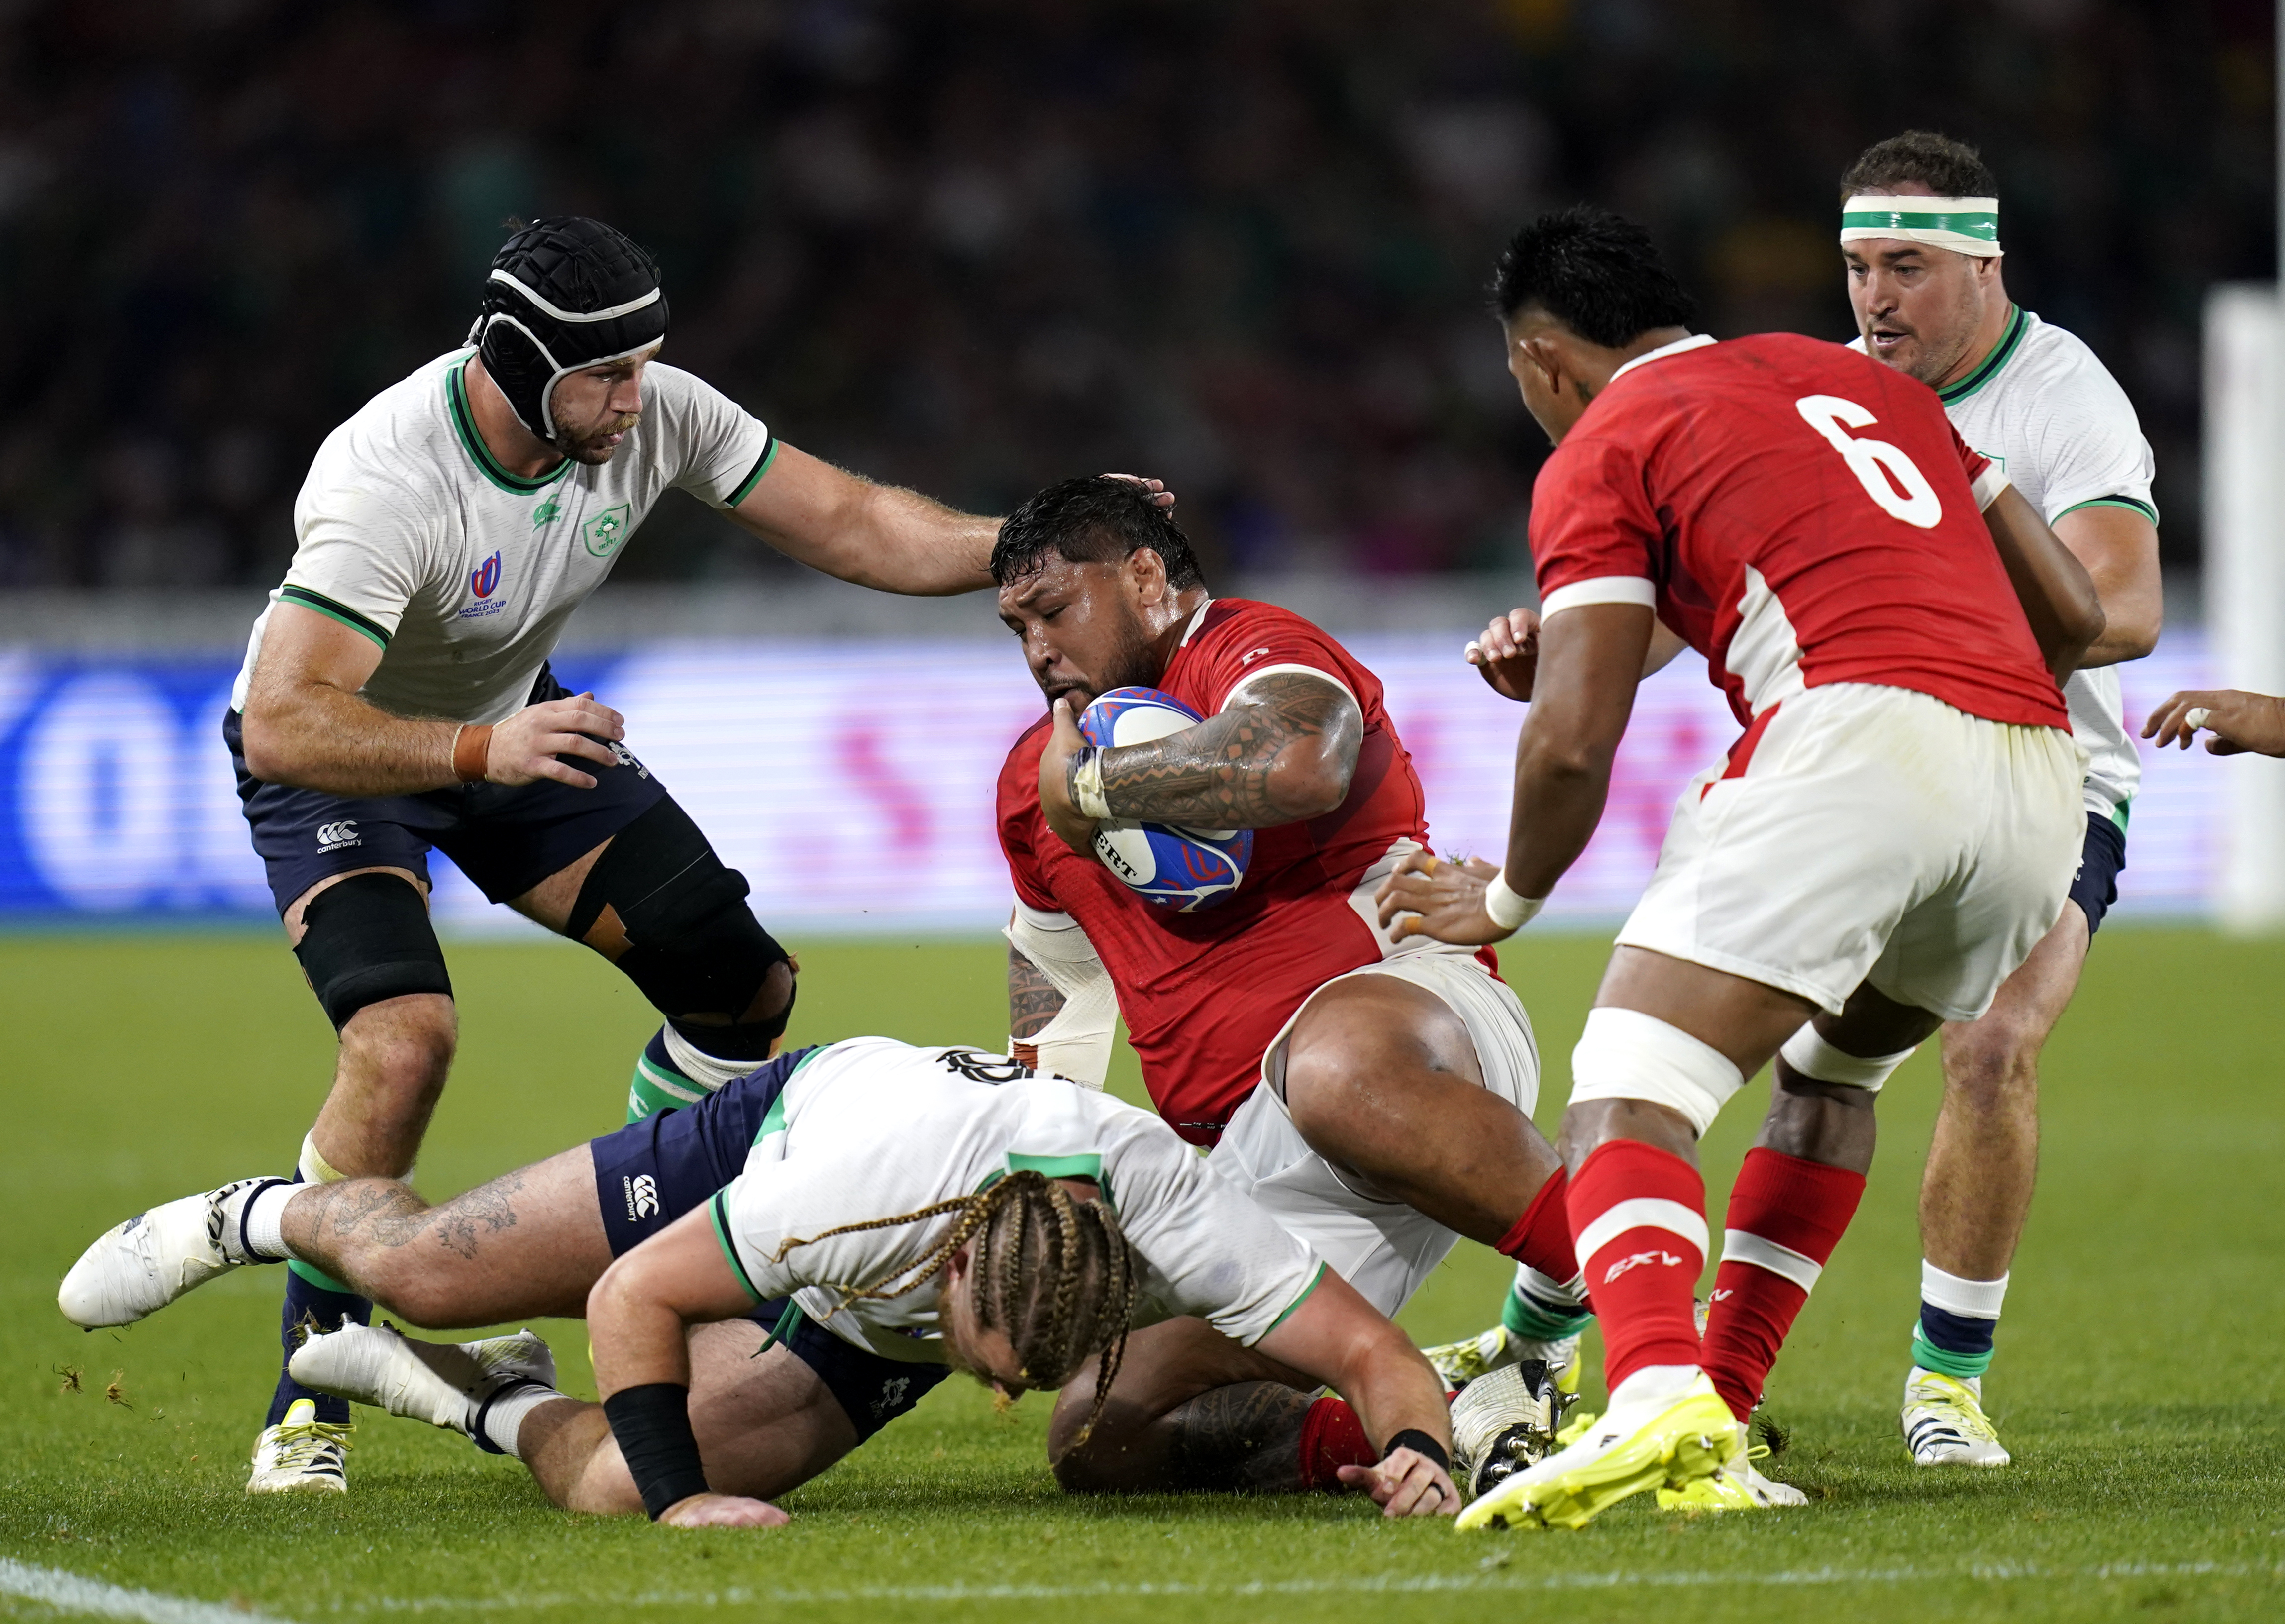 Finlay Bealham, on floor, managed just 10 minutes against Tonga before being forced off by a head knock